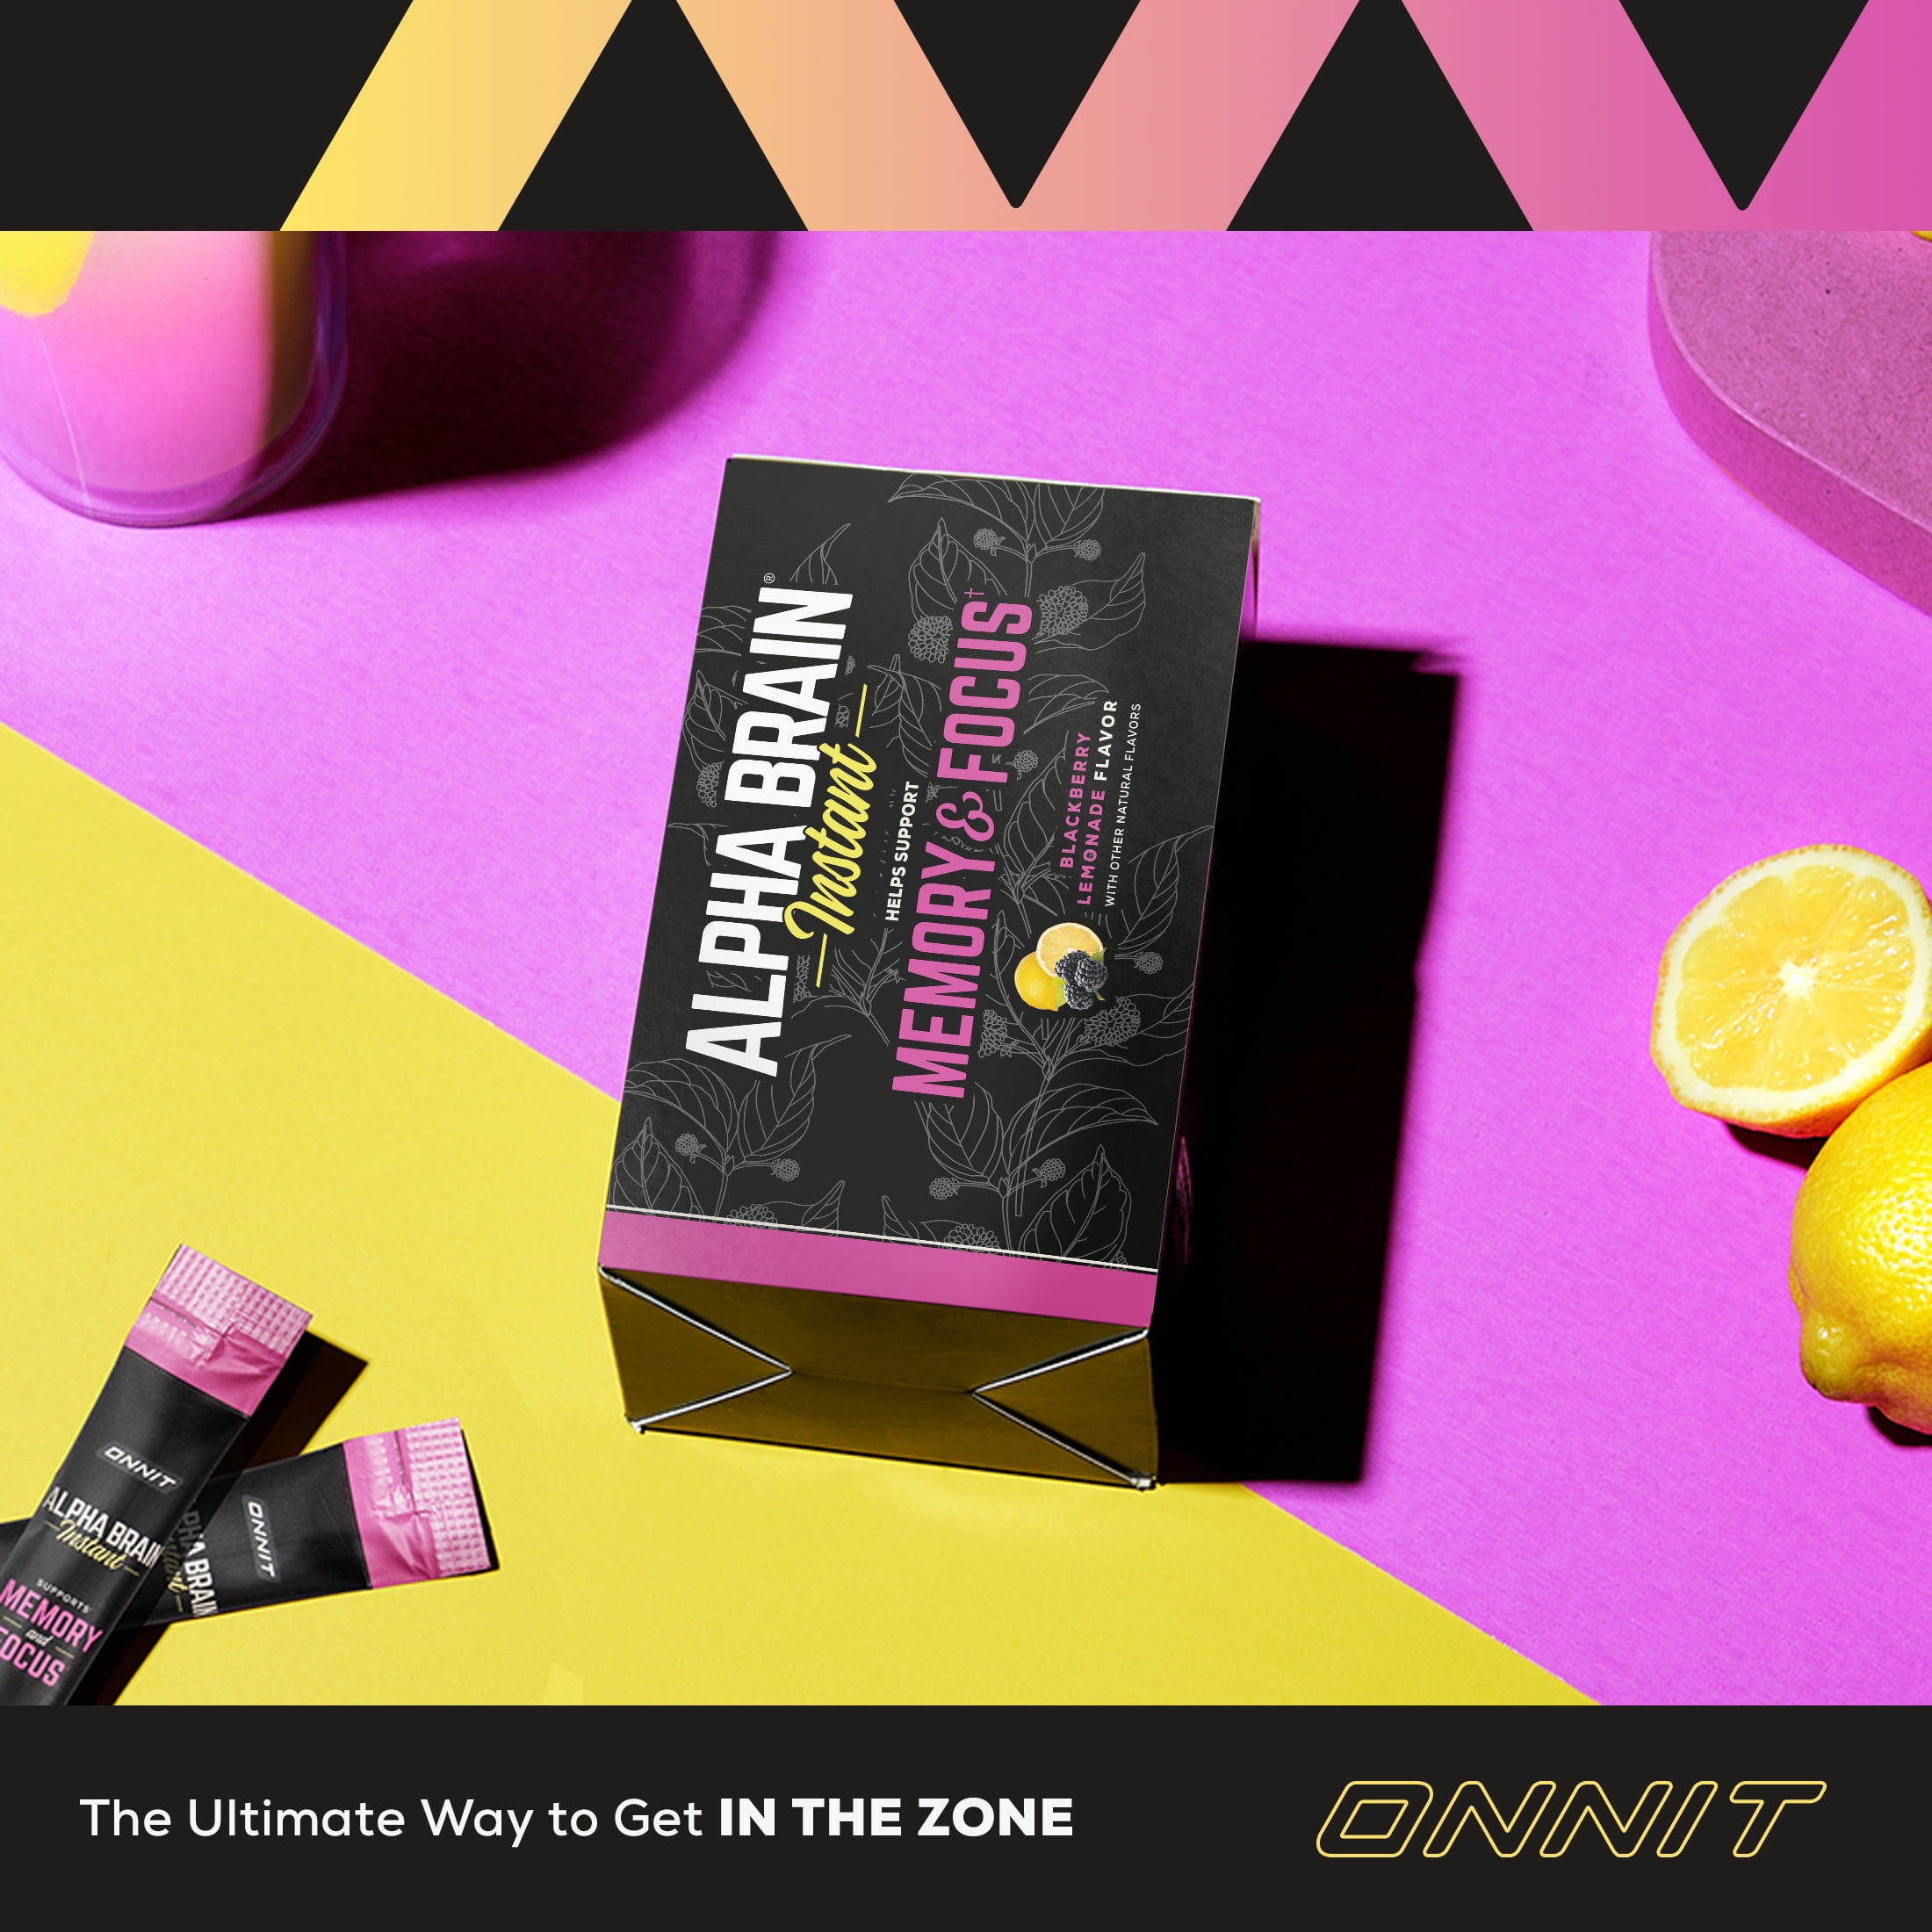 Onnit on X: Get Alpha BRAIN® and Alpha BRAIN® Instant today at